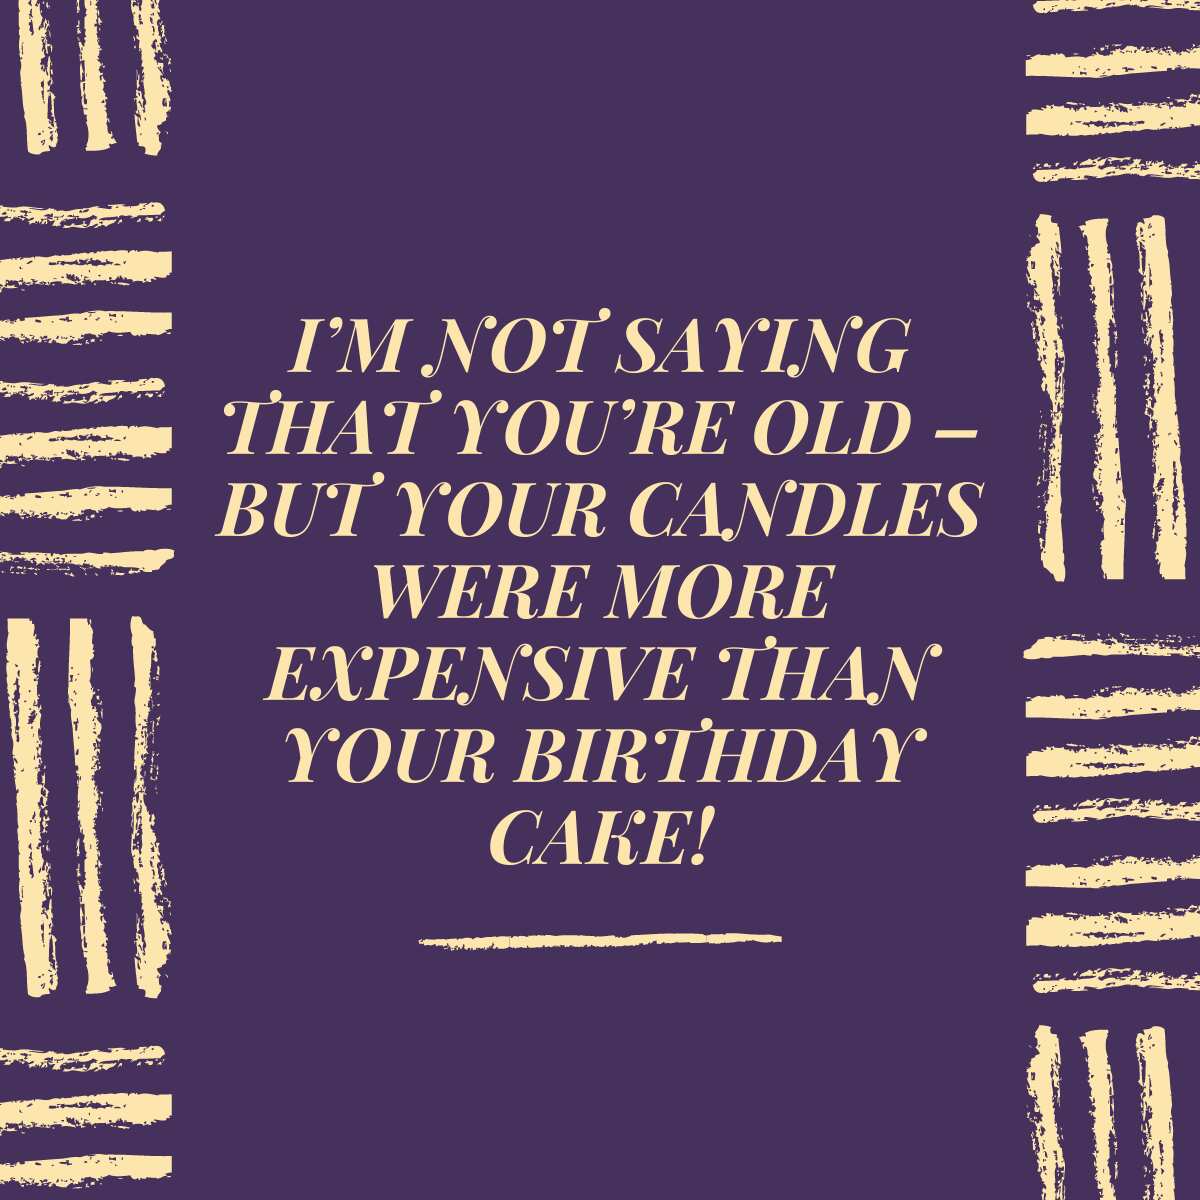 50+ inspiring happy 80th birthday wishes, quotes, and images